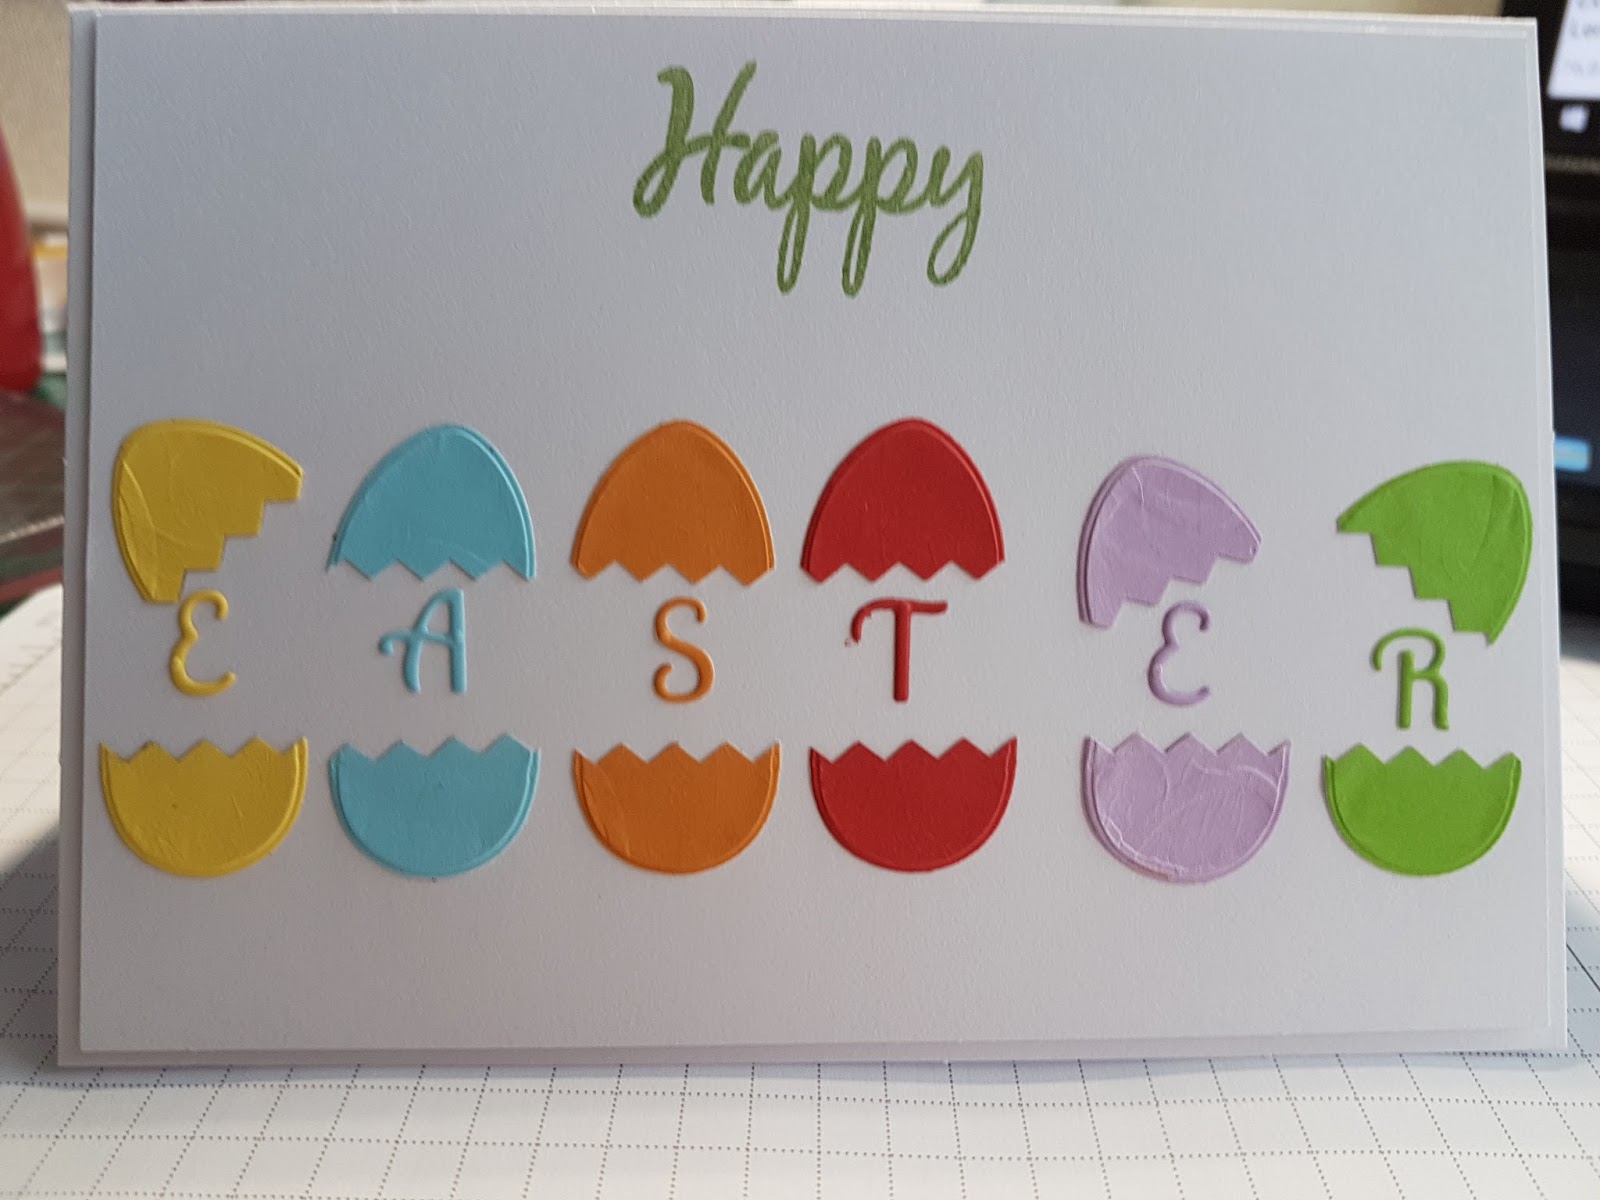 Nessie's Crafty Cards: A Quick Fun Easter Card